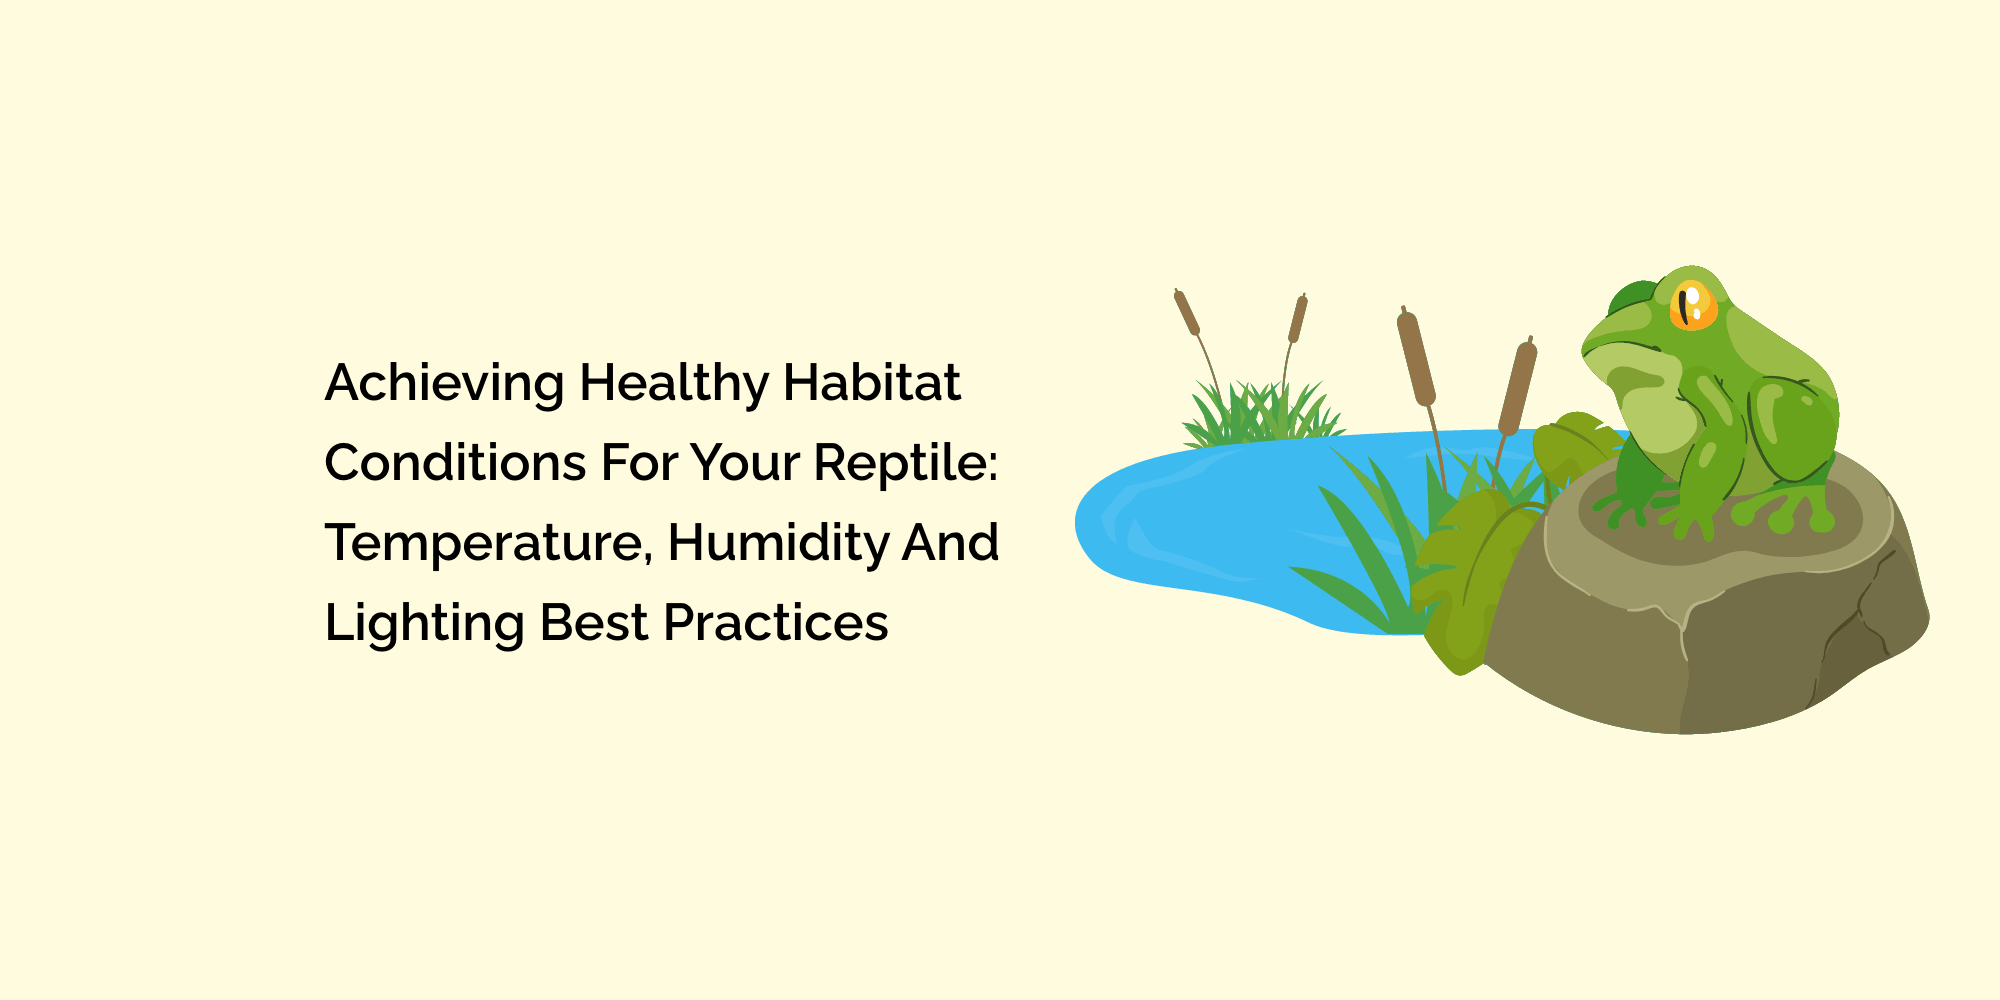 Achieving Healthy Habitat Conditions for Your Reptile: Temperature, Humidity and Lighting Best Practices